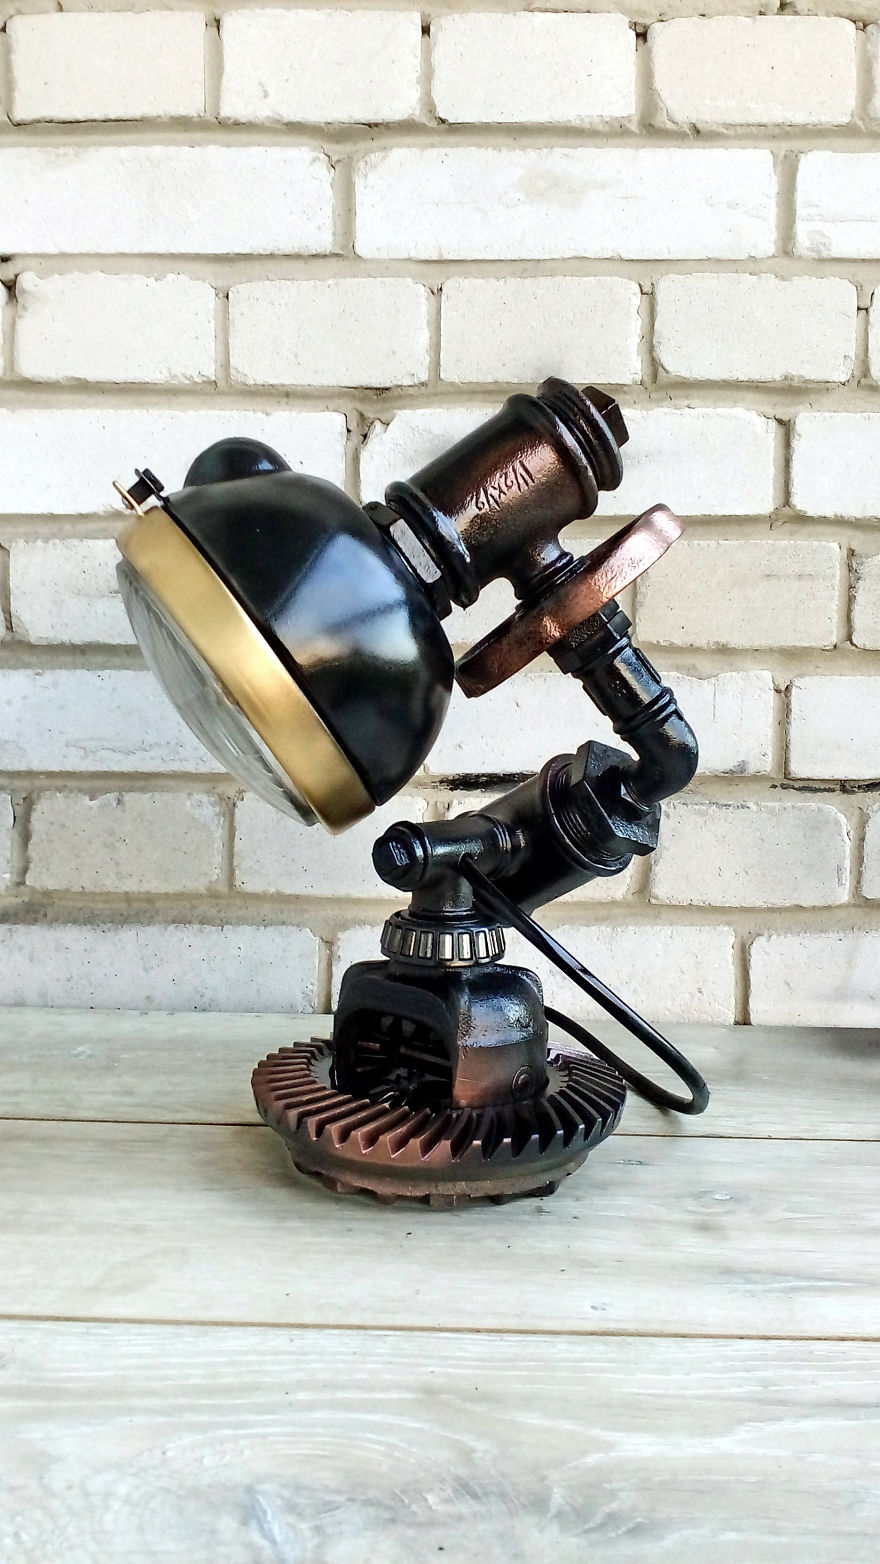 Edison Table Lamp Light Plumbing Home Trend Industrial Lighting 2019 Industrial Bedside Table Lamp Machine Age Table Lamp Steampunk Lamp Rustic Lamp Pipe Gift For Husband Rustic Lamp Table Rustic